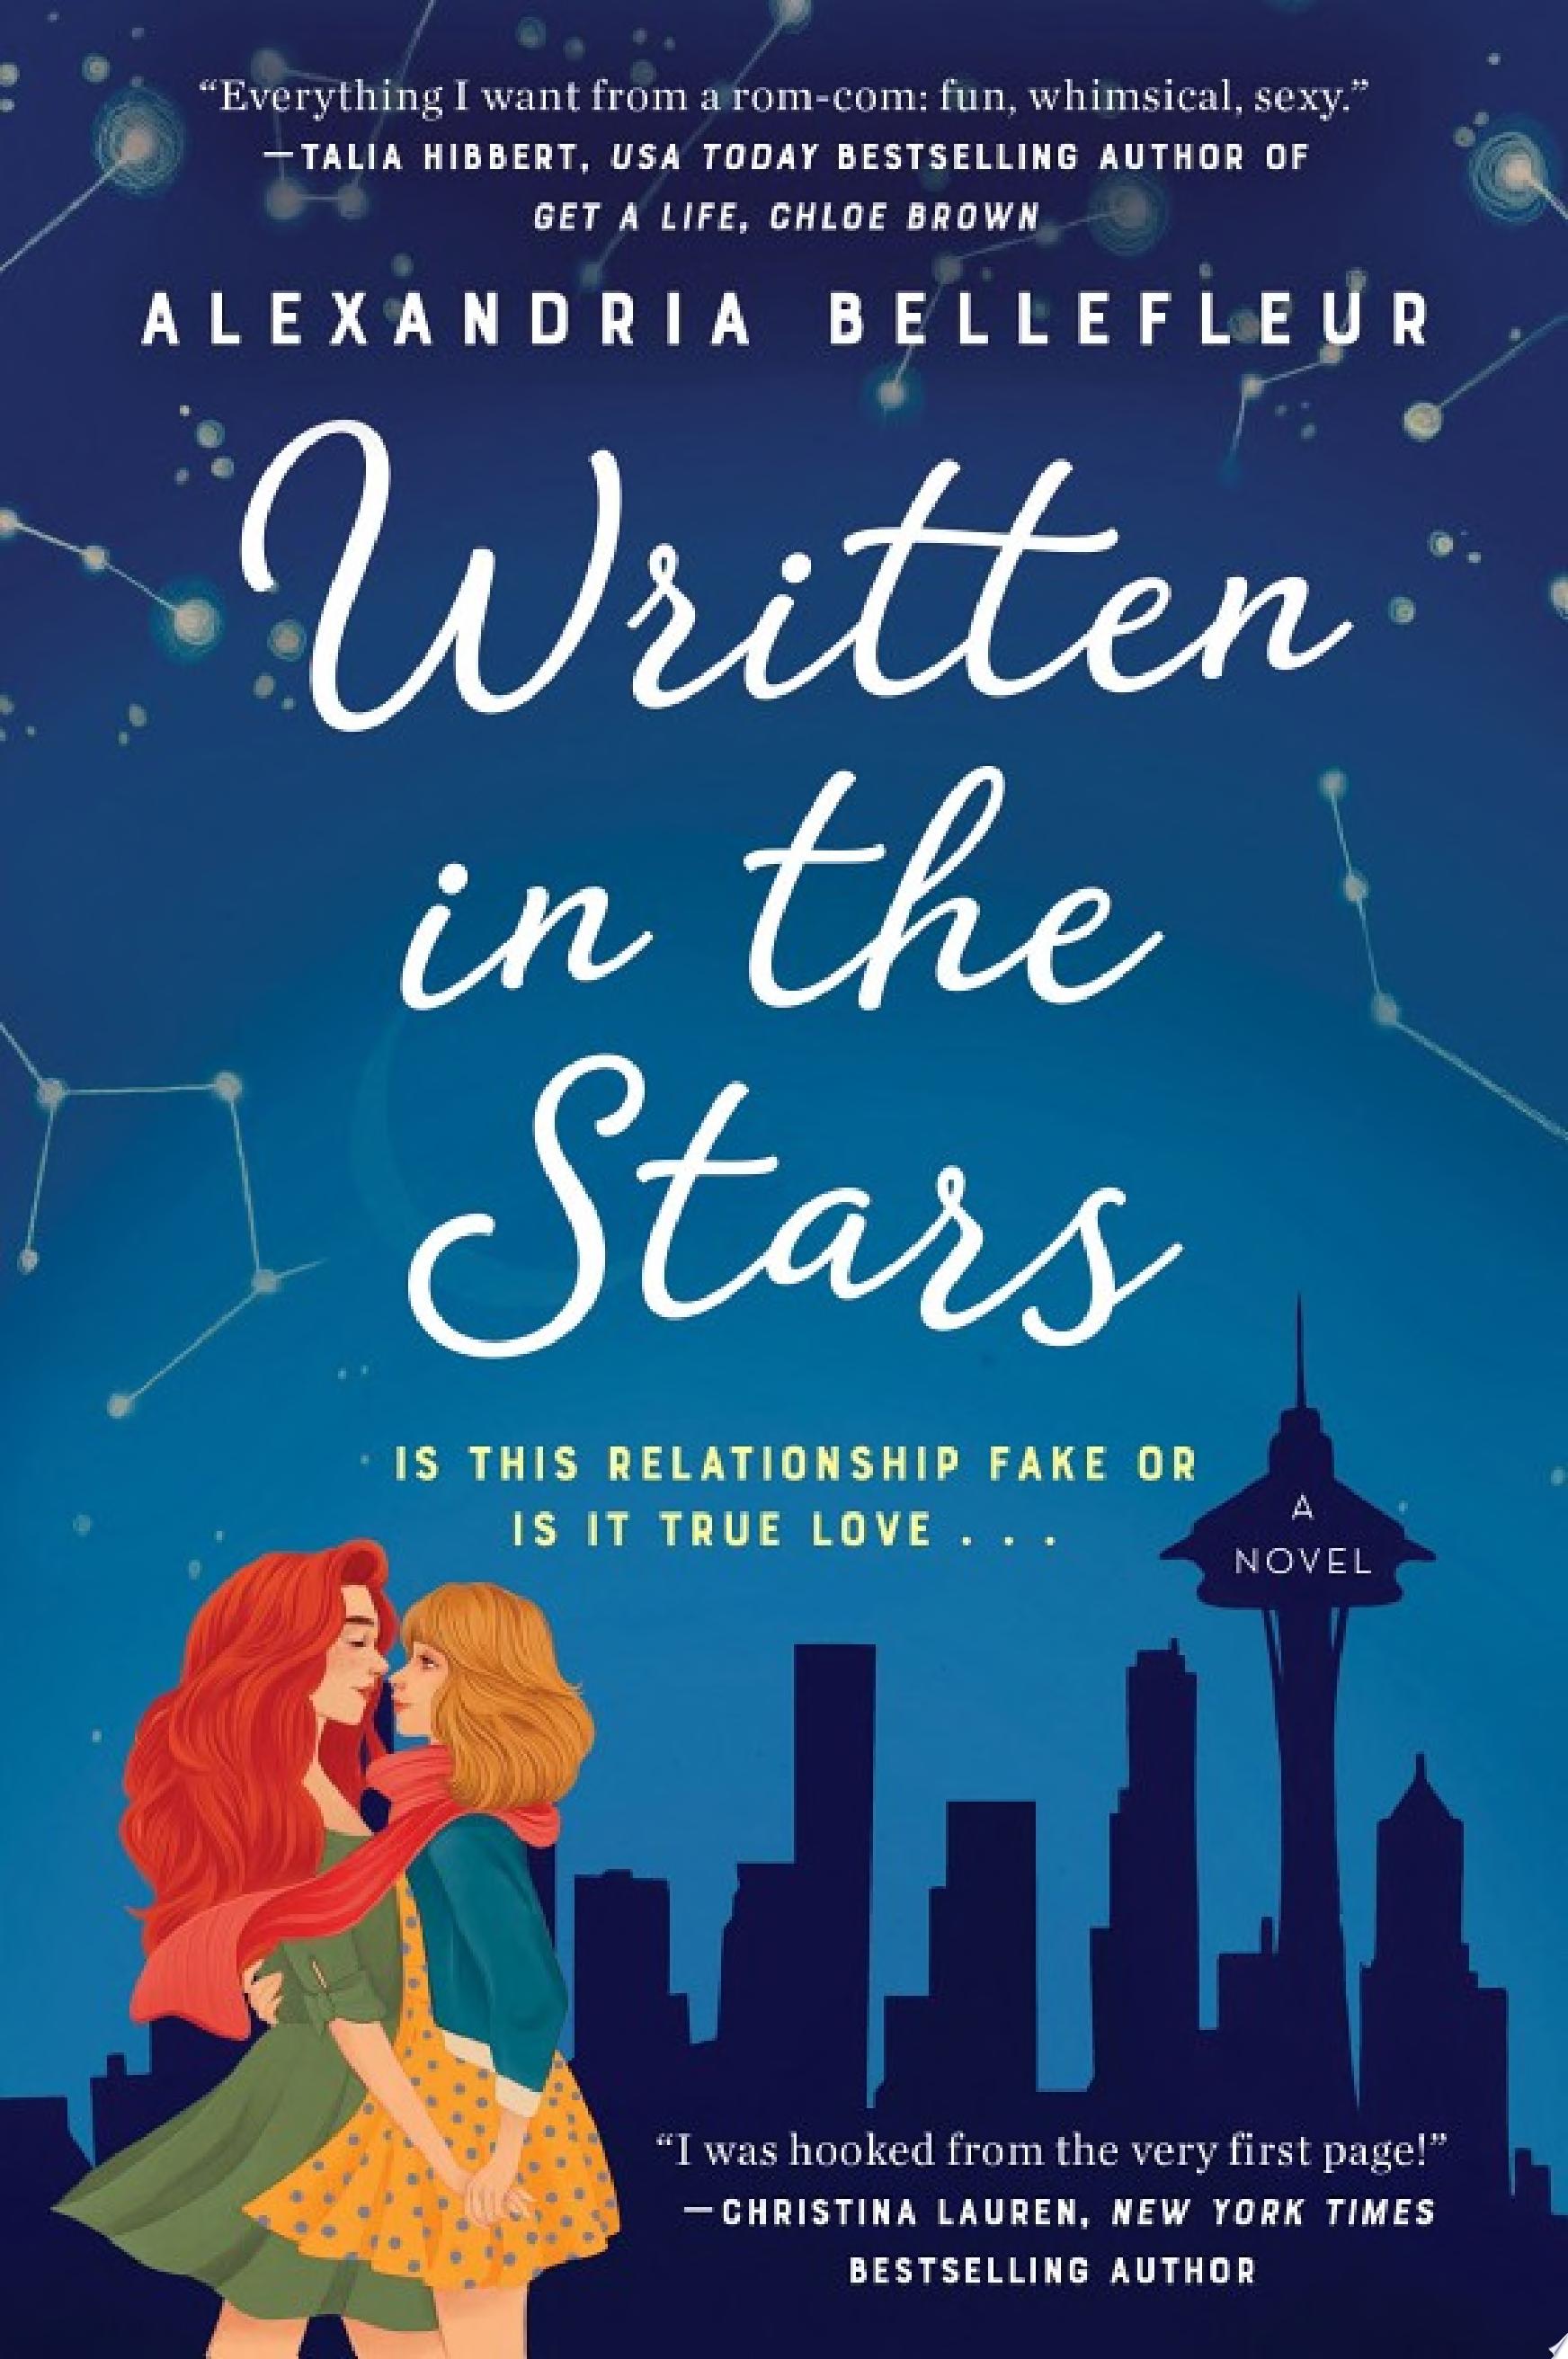 Image for "Written in the Stars"